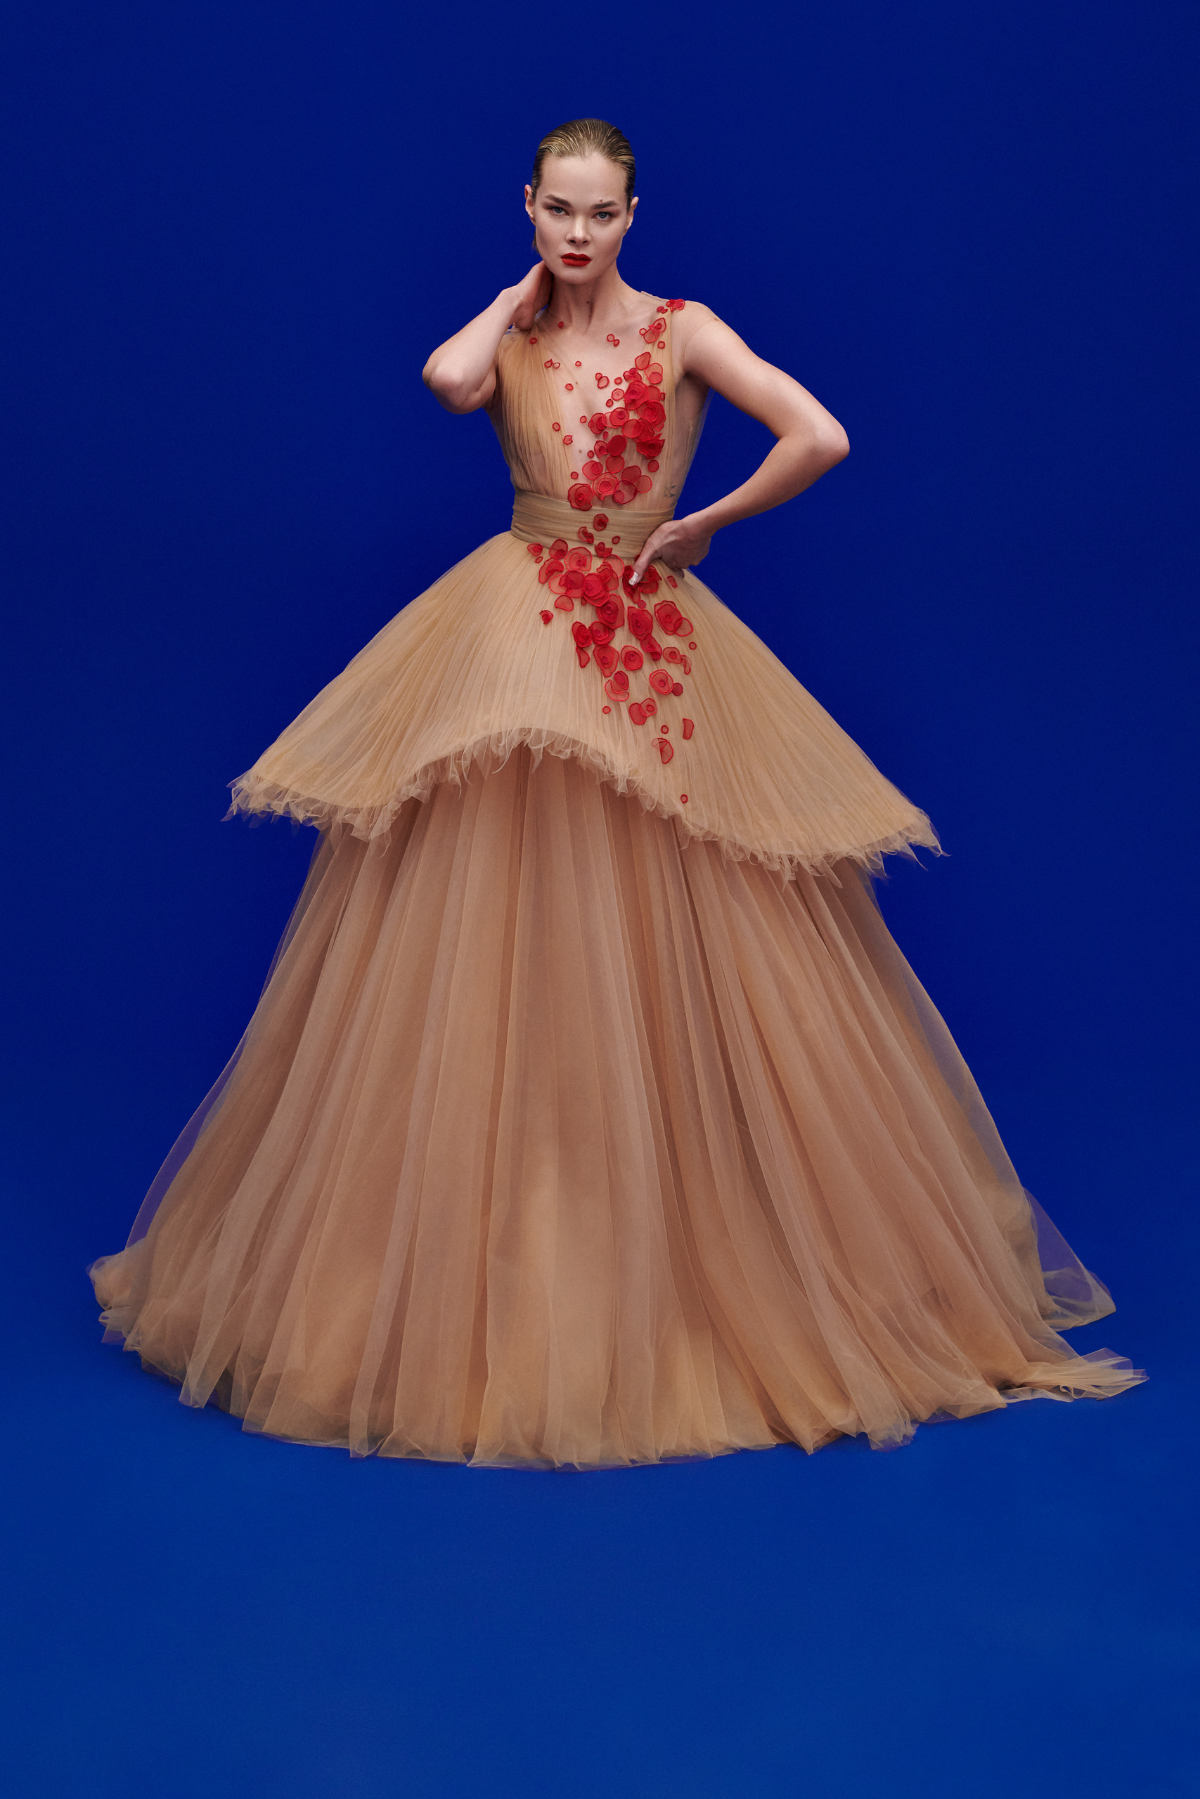 Yanina Couture Presents Its New Spring/Summer 2023 Collection